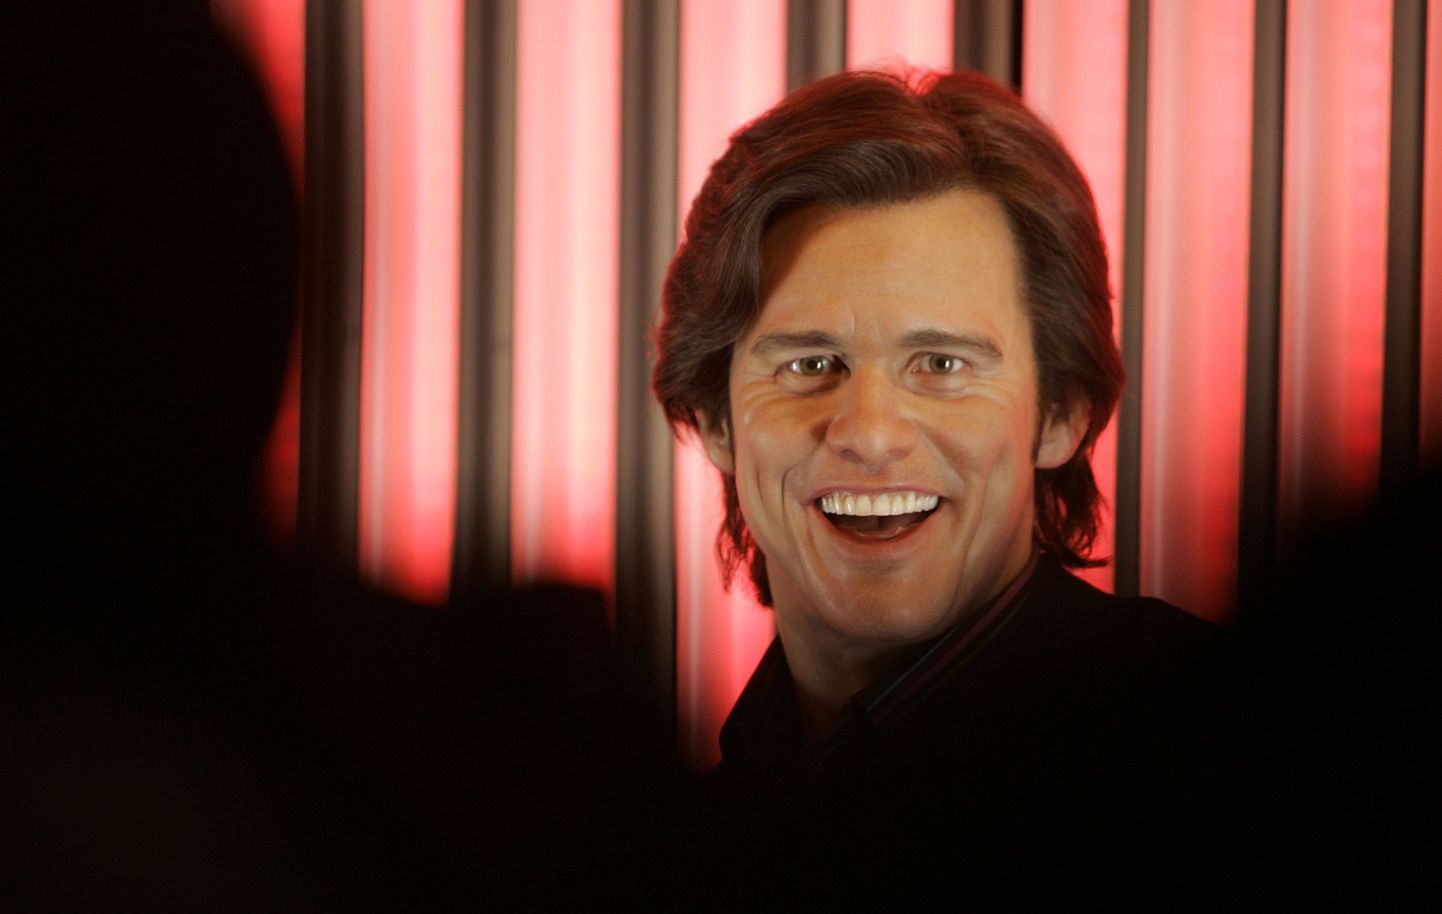 An interactive waxwork of U.S. actor Jim Carrey goes on display at Madame Tussauds museum in London, Thursday, March 13, 2008. The exhibit features a voice changing microphone that can alter visitors voices into three different styles to reflect the many